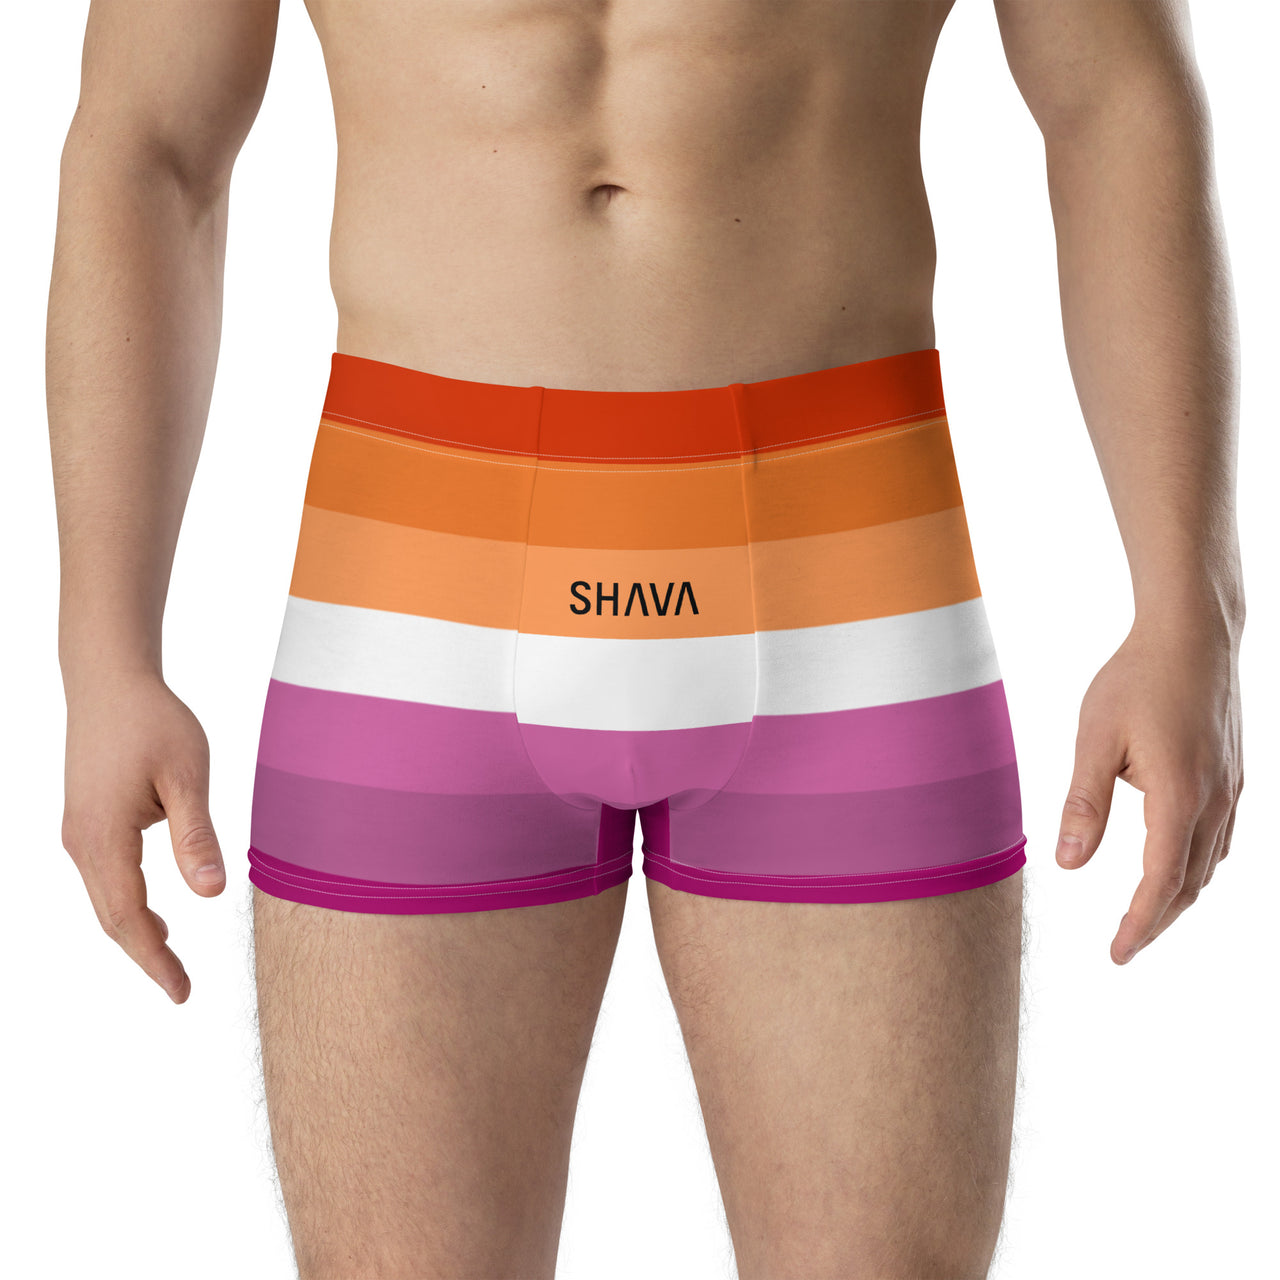 Lesbian Flag LGBTQ Boxer for Her/Him or They/Them SHAVA